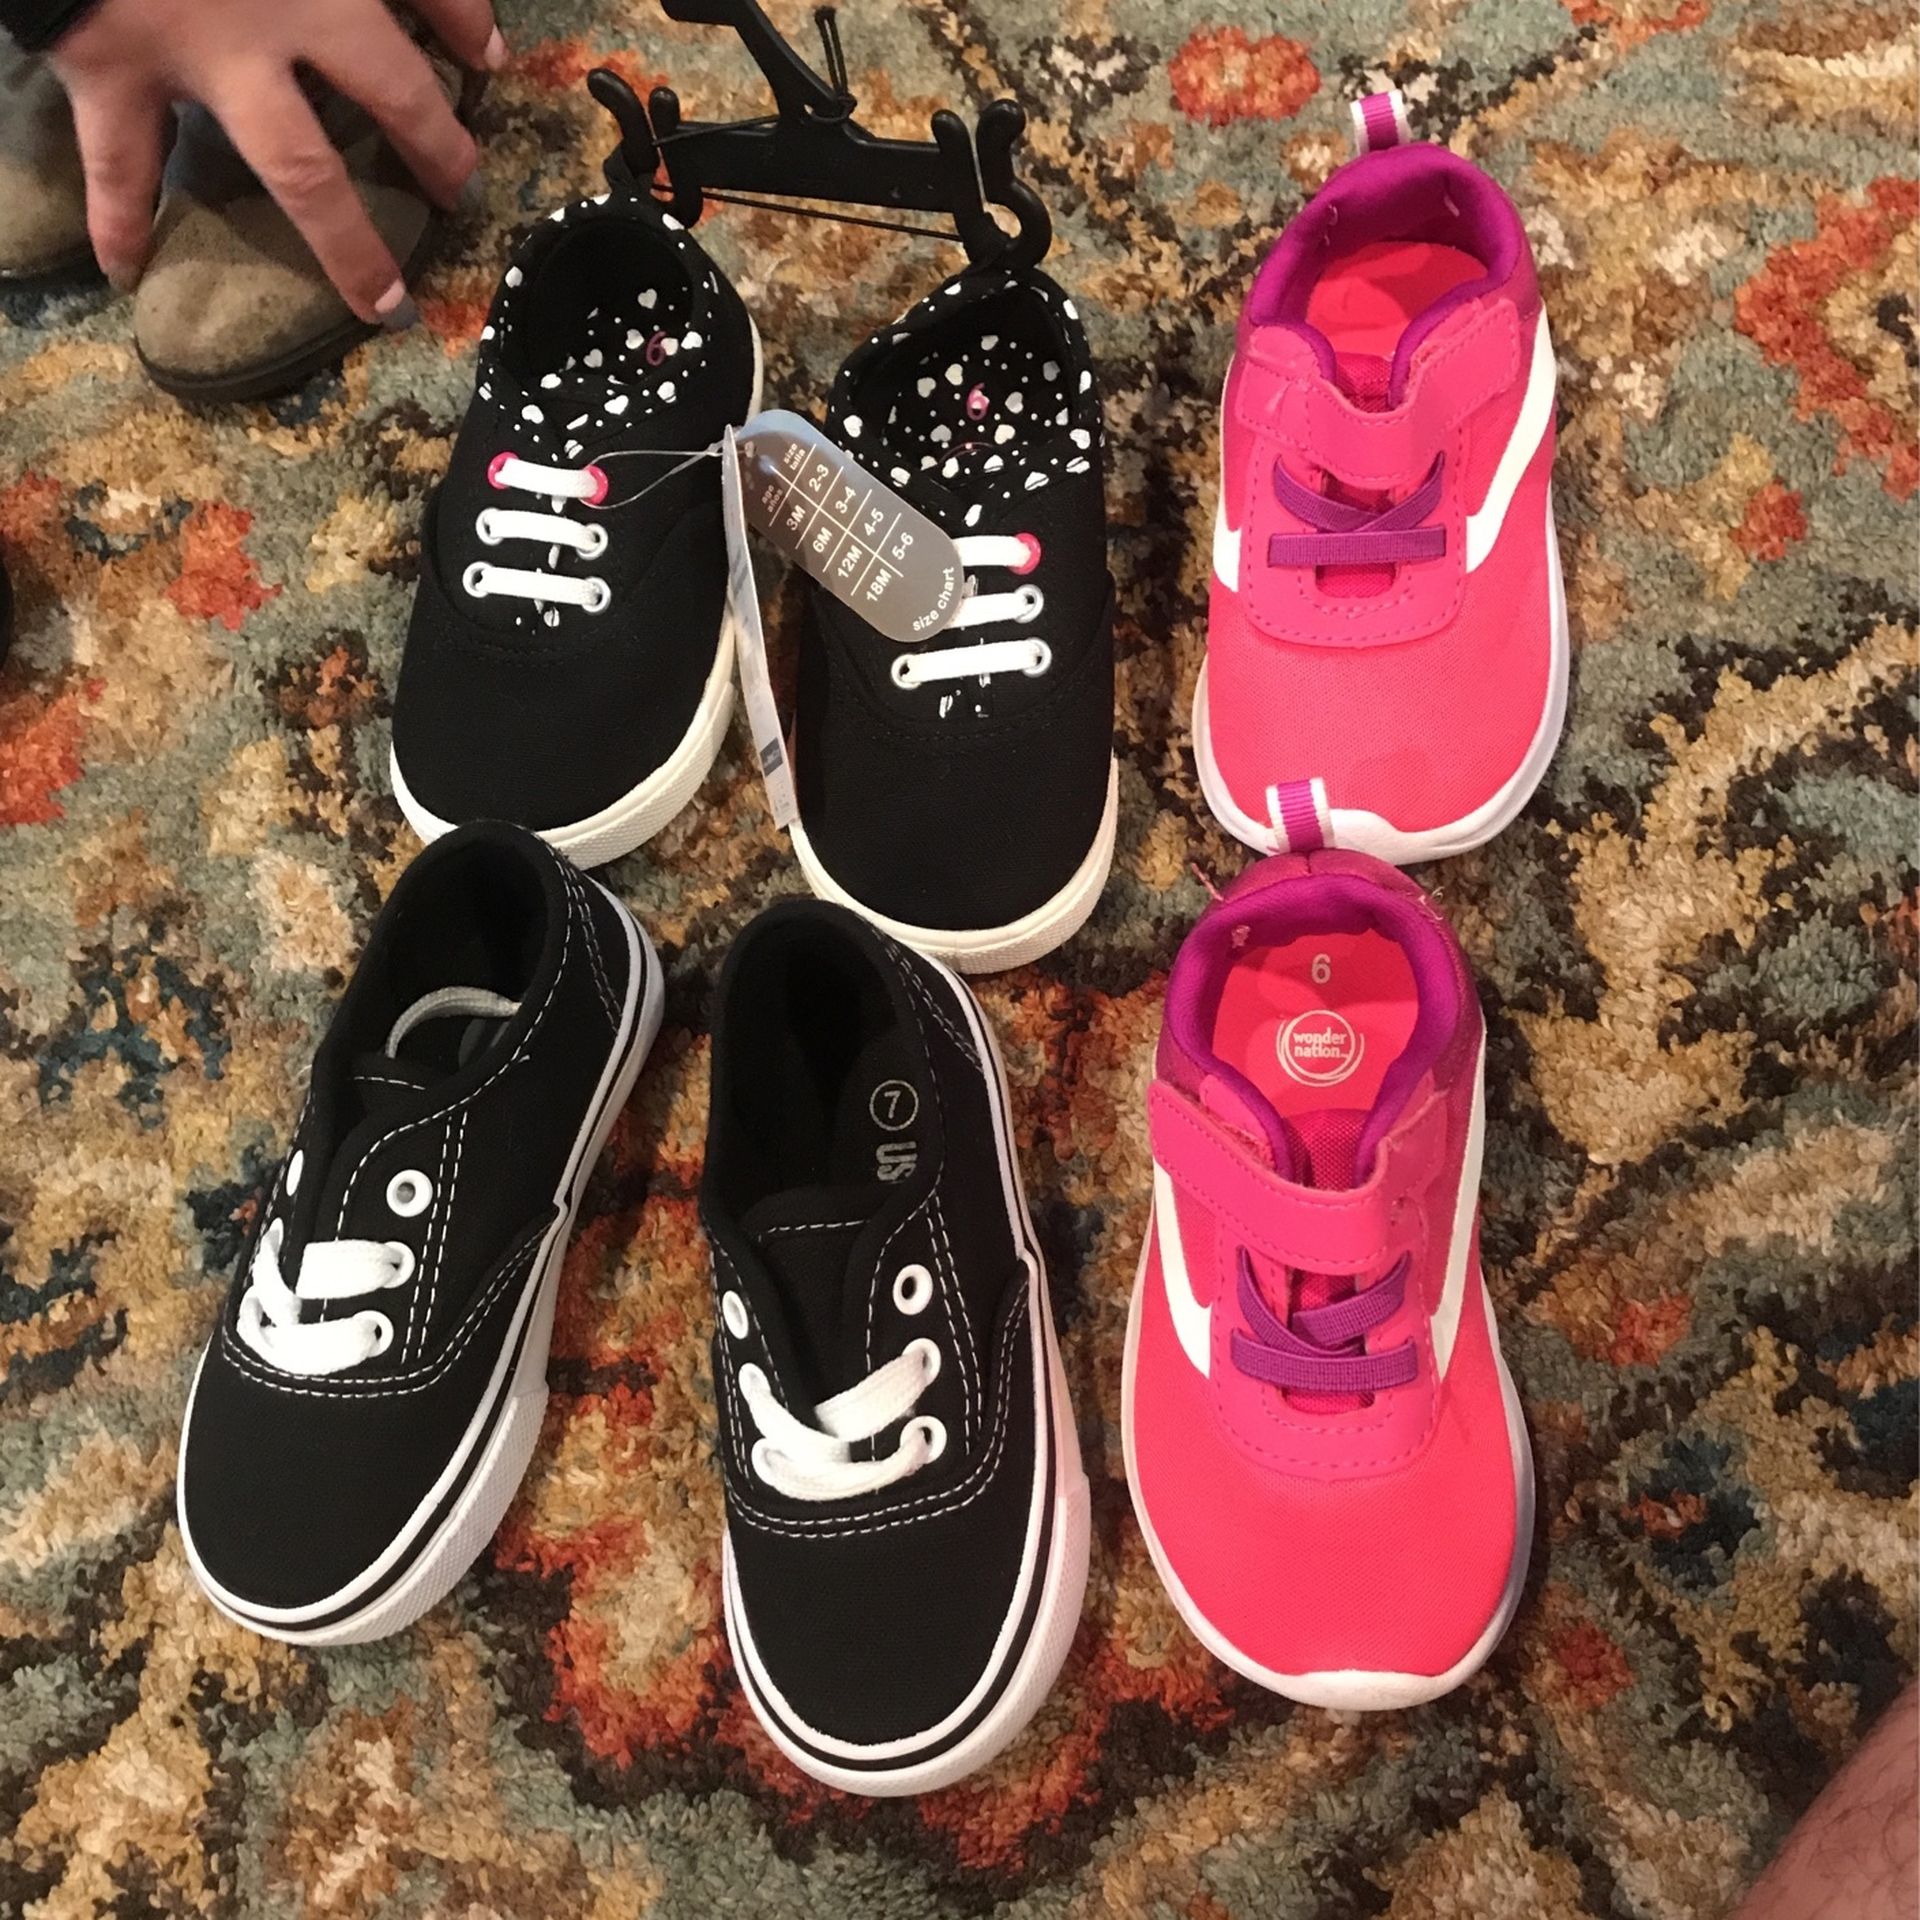 Girls Shoes Size 6 & 7 Toddler